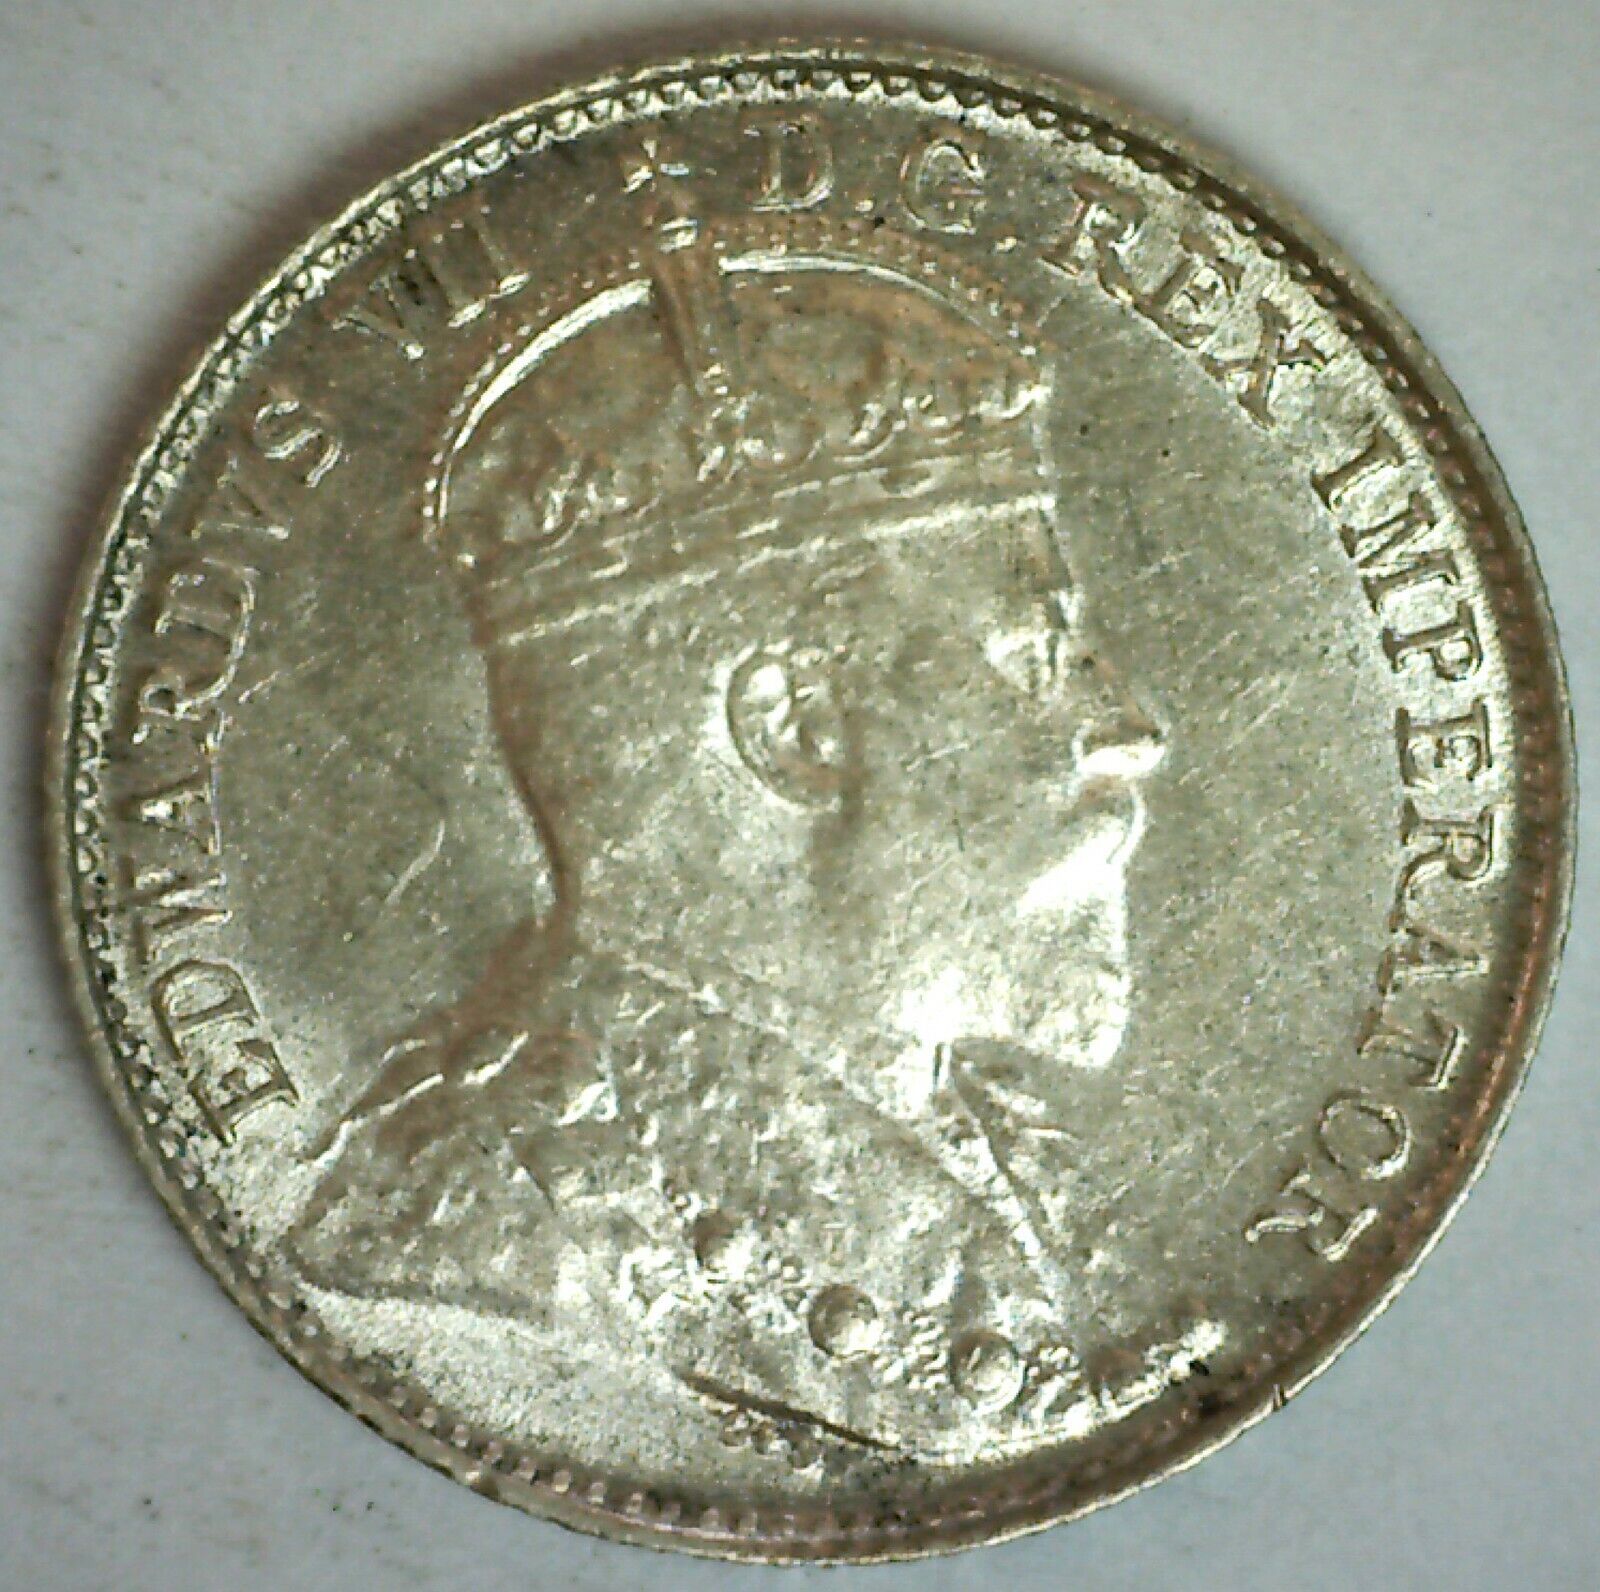 1907 Canada Industry No. Memphis Mall 1 Silver Five Cents Uncirculated Coin 5c Edwa Canadian